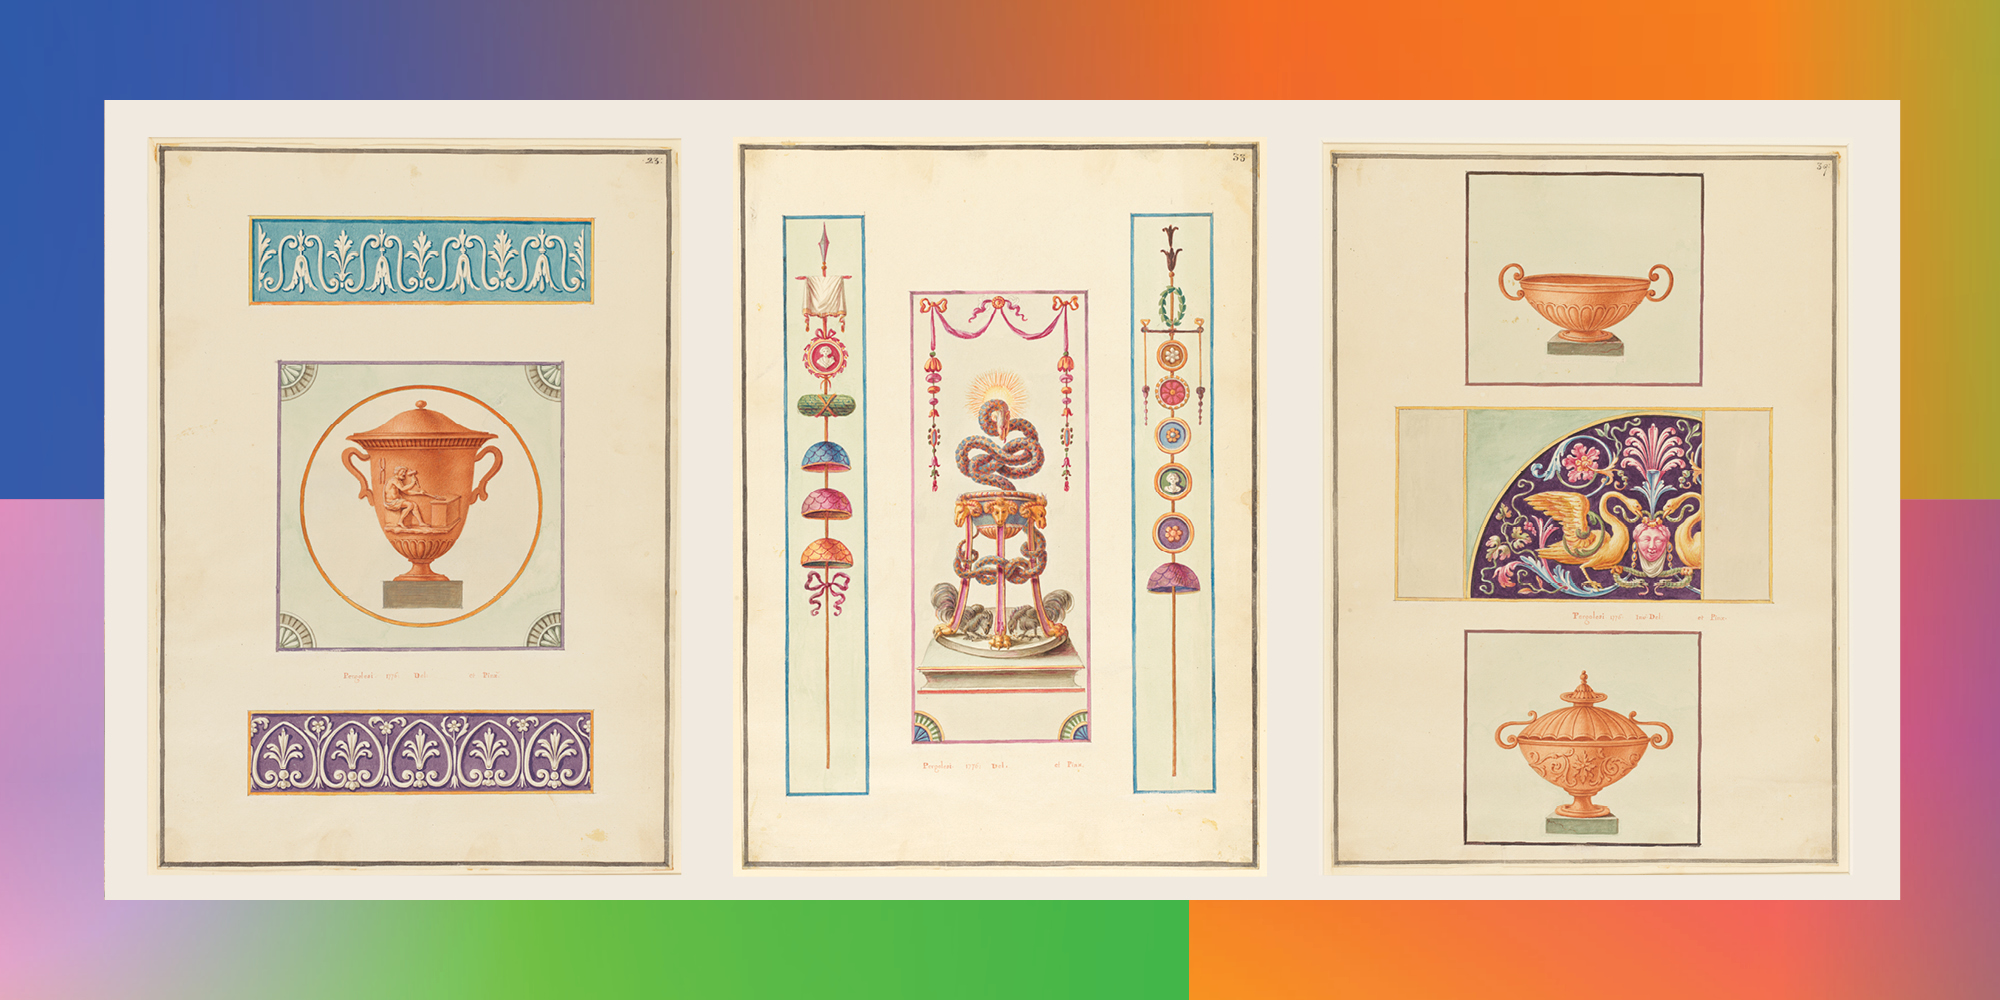 Three vibrantly-colored, Ancient Roman-inspired sketches of ornamental designs against a rainbow gradient background.